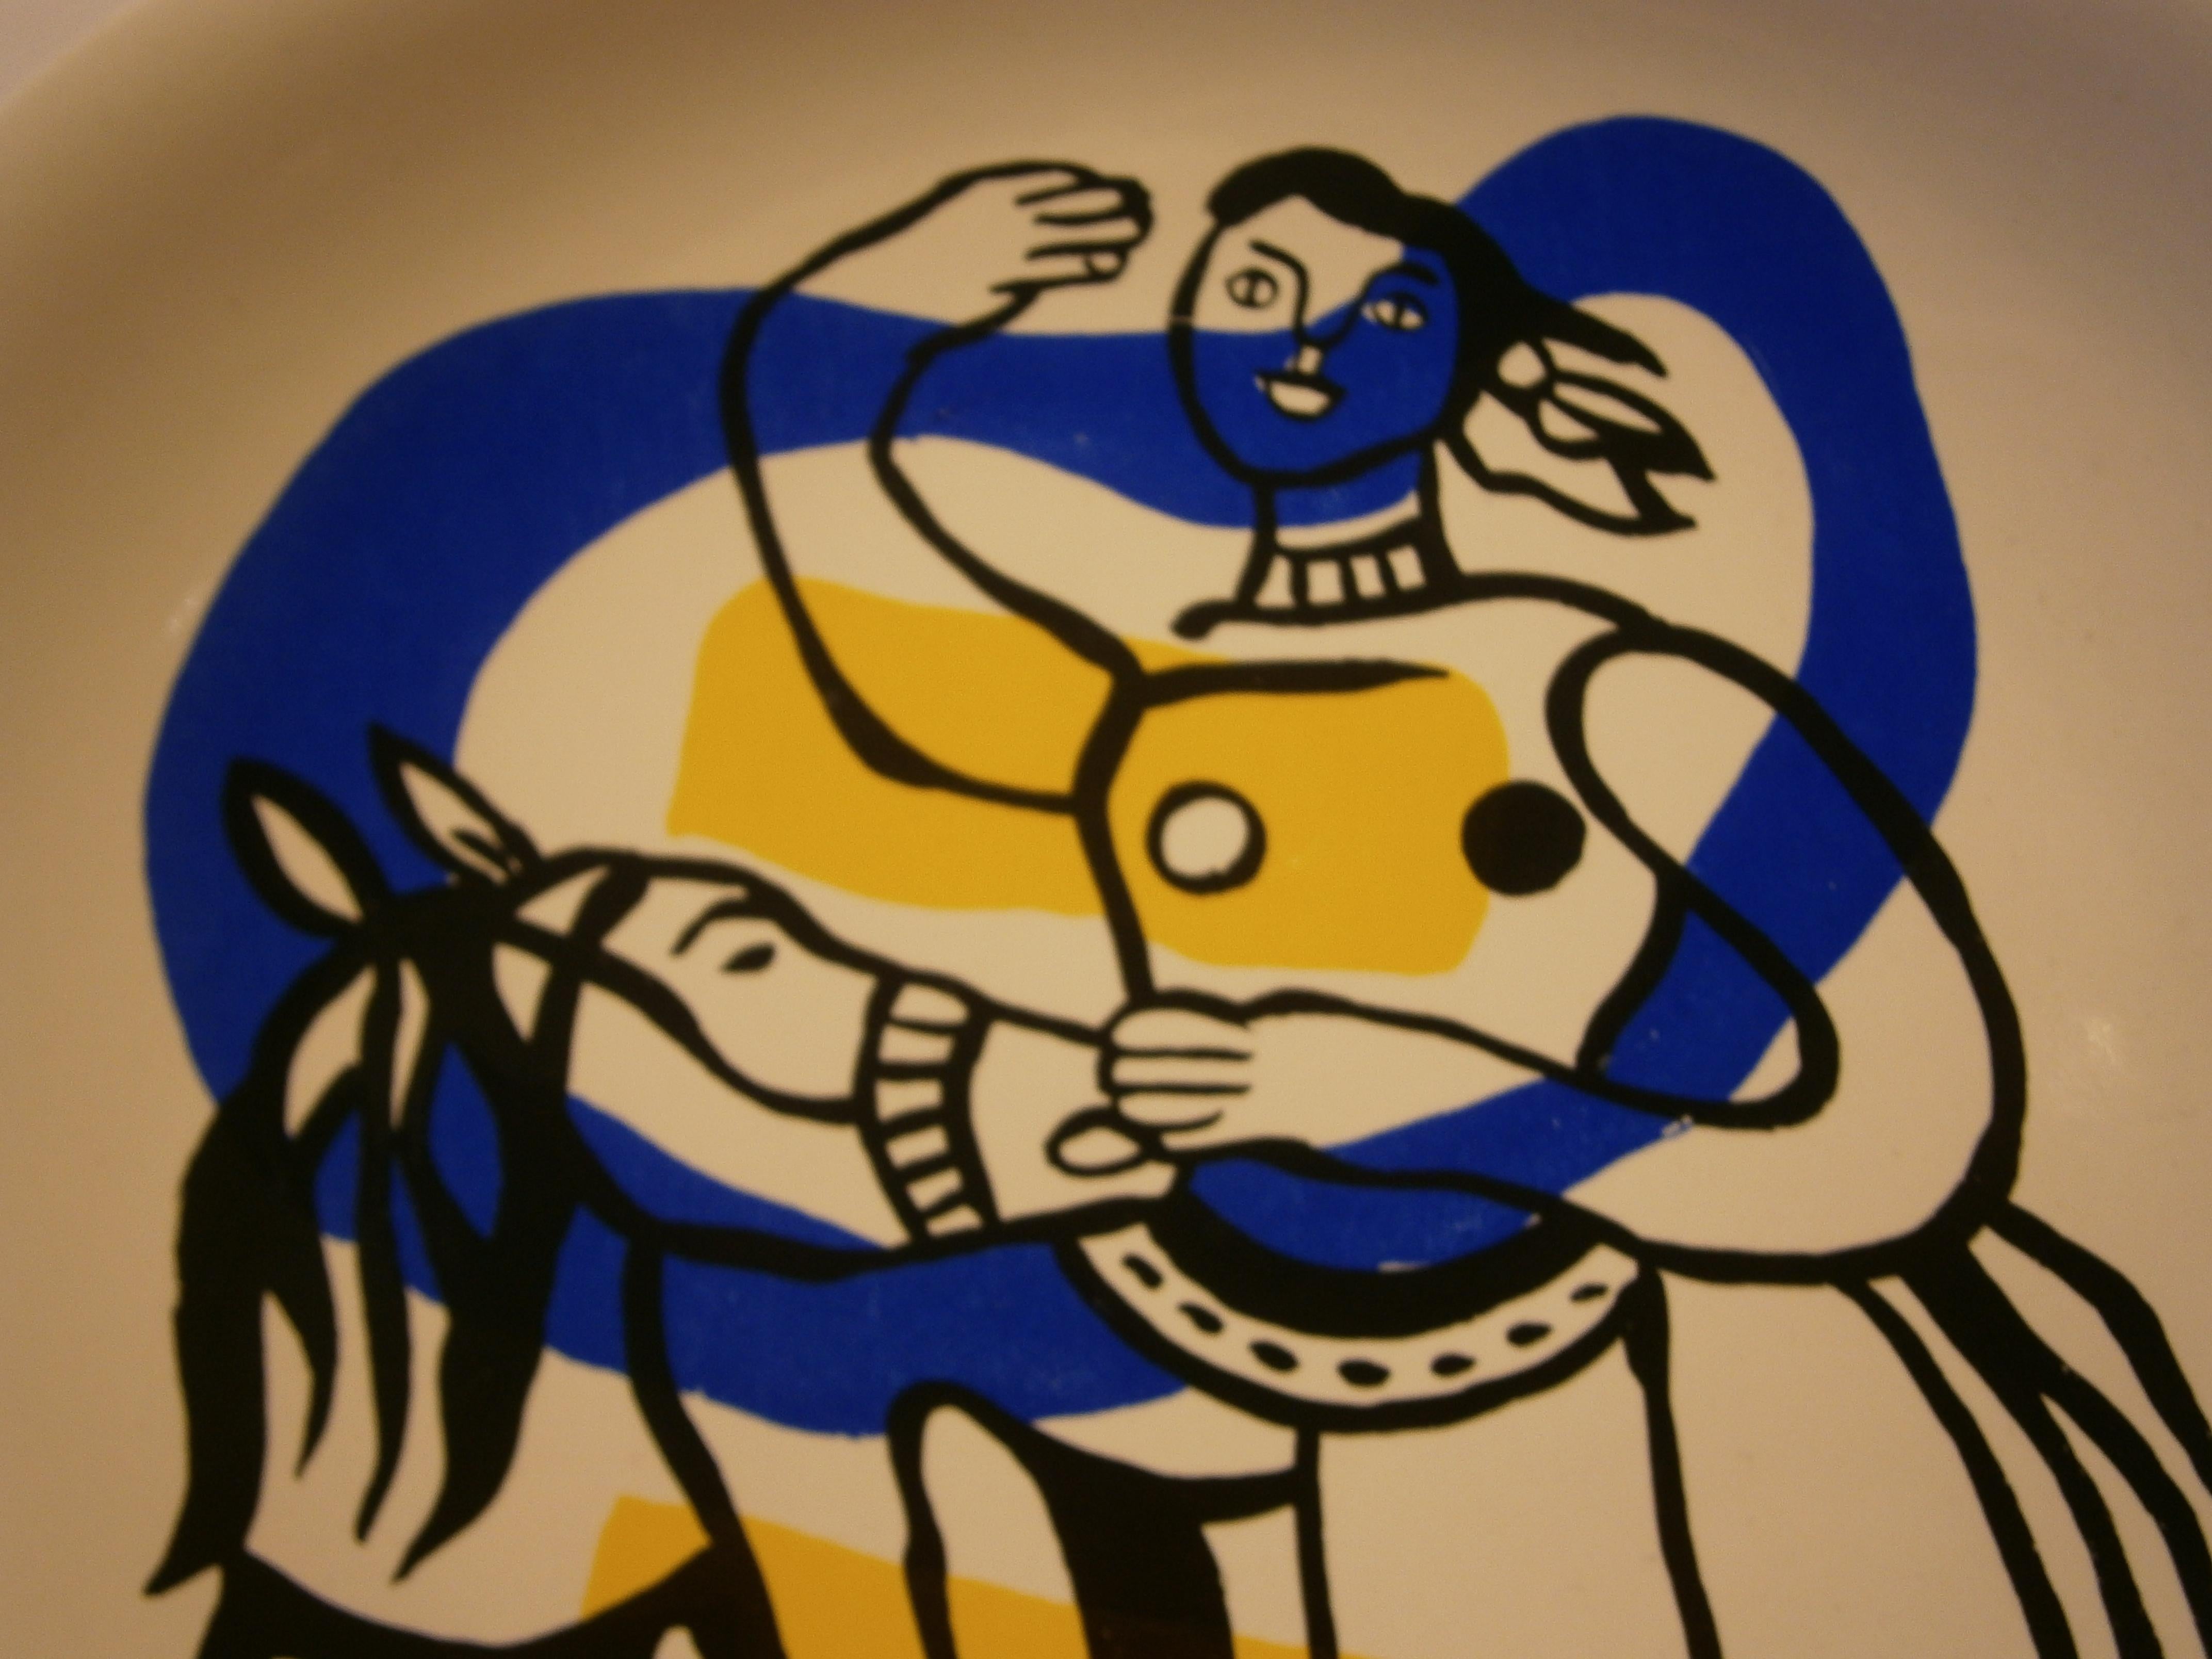 Mid-Century Modern Ceramic Plate from Fernand Leger's Acrobats Series, circa 1950s For Sale